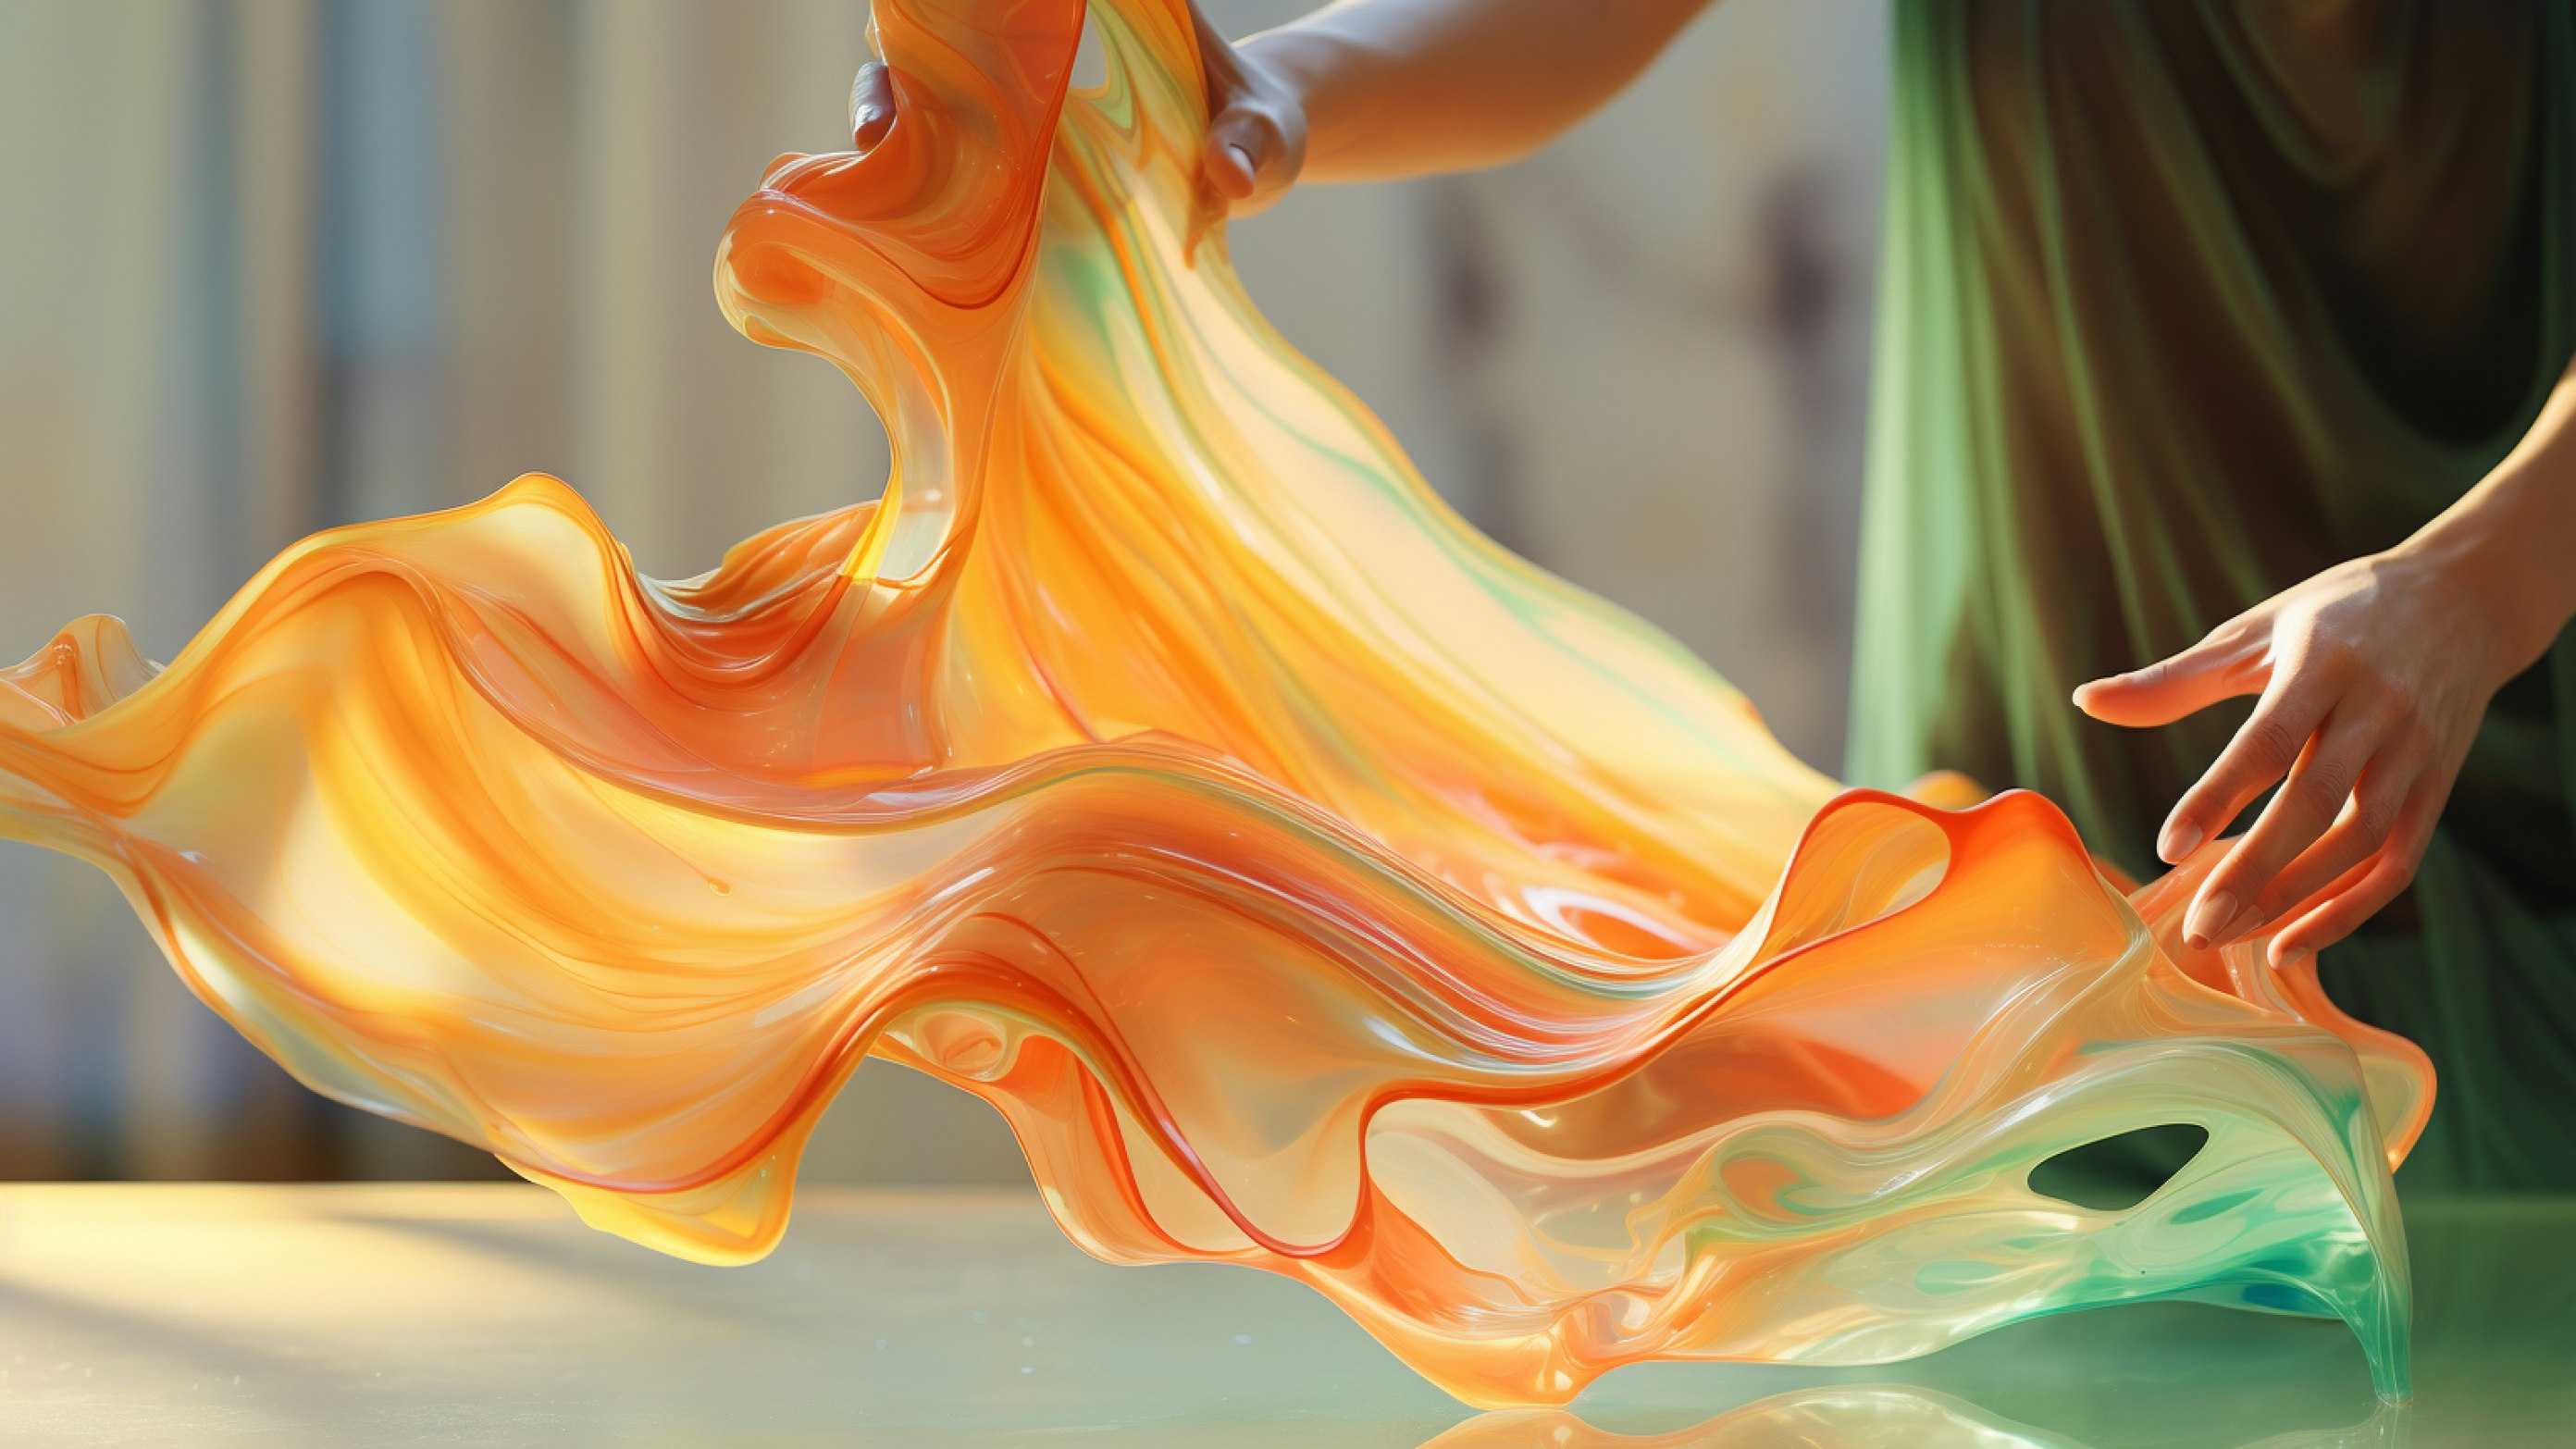 AI-generated 3D render of a person handling an abstract semitransparent shiny veil in shades of orange and green